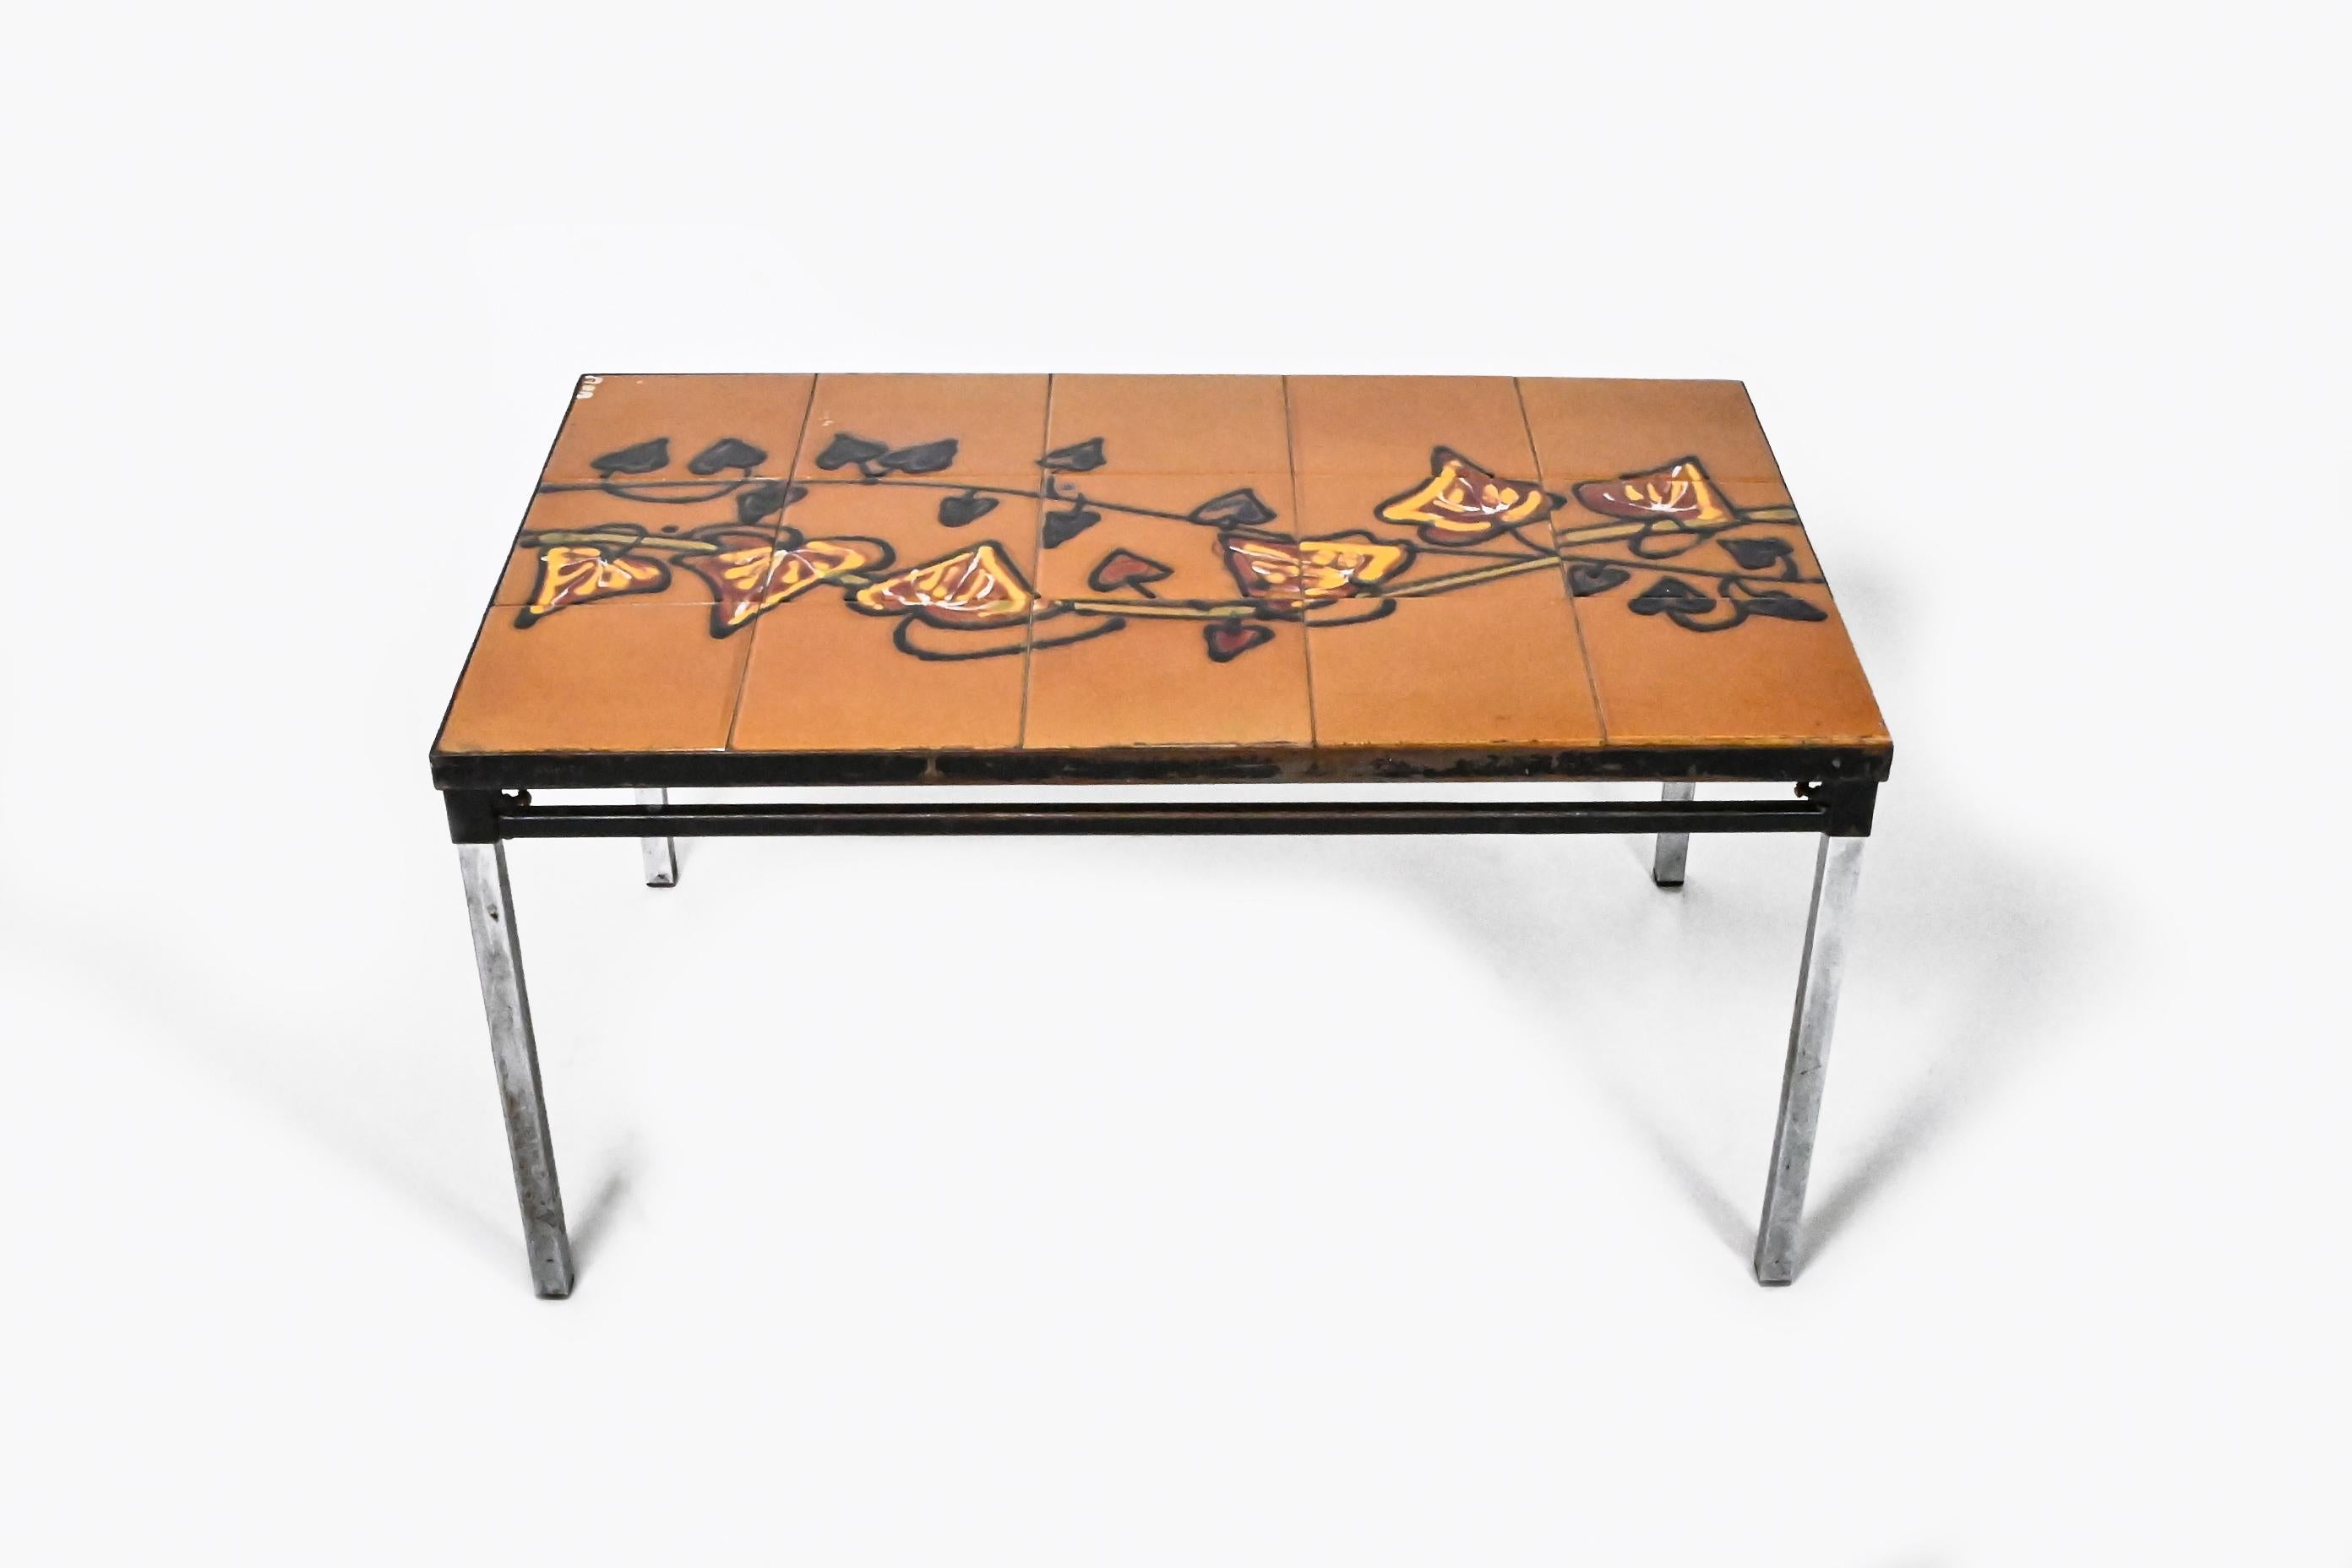 A Midcentury Tiled coffee table by Adri Belgique is out for sale. This is a well-known signature piece of the 1960s era Belgian design production.